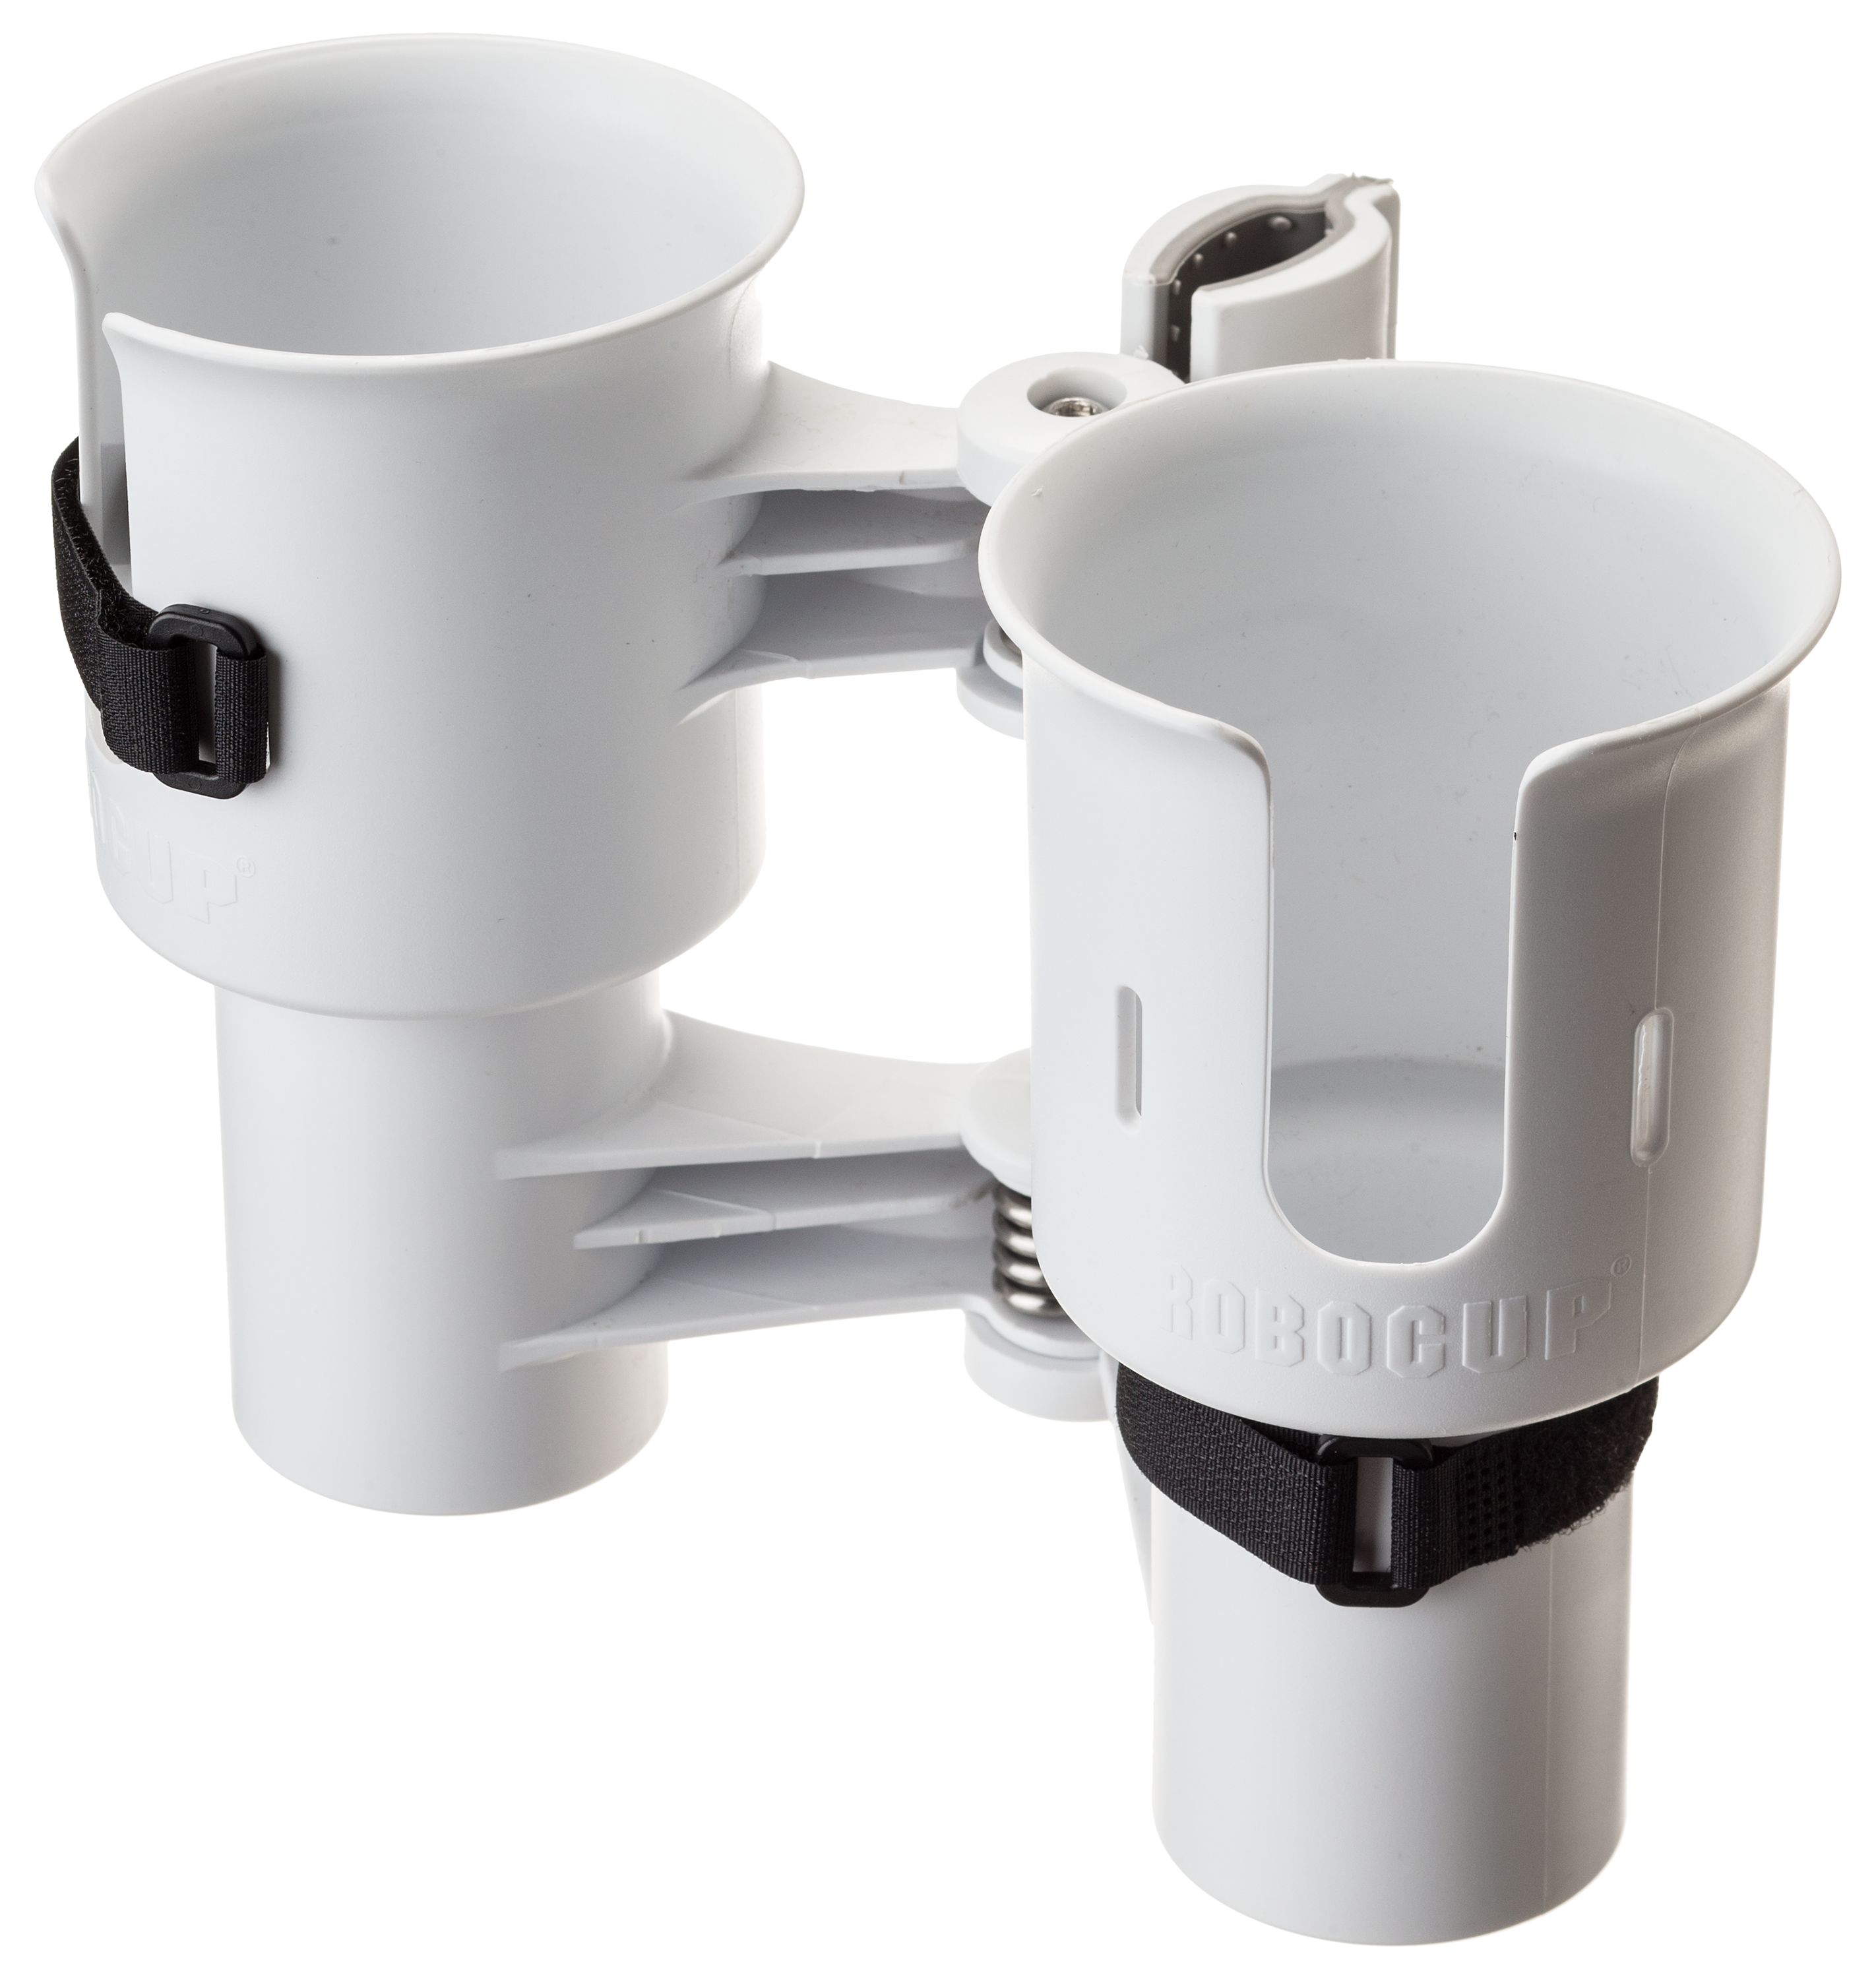 RoboCup Portable Caddy Cup Holder - White